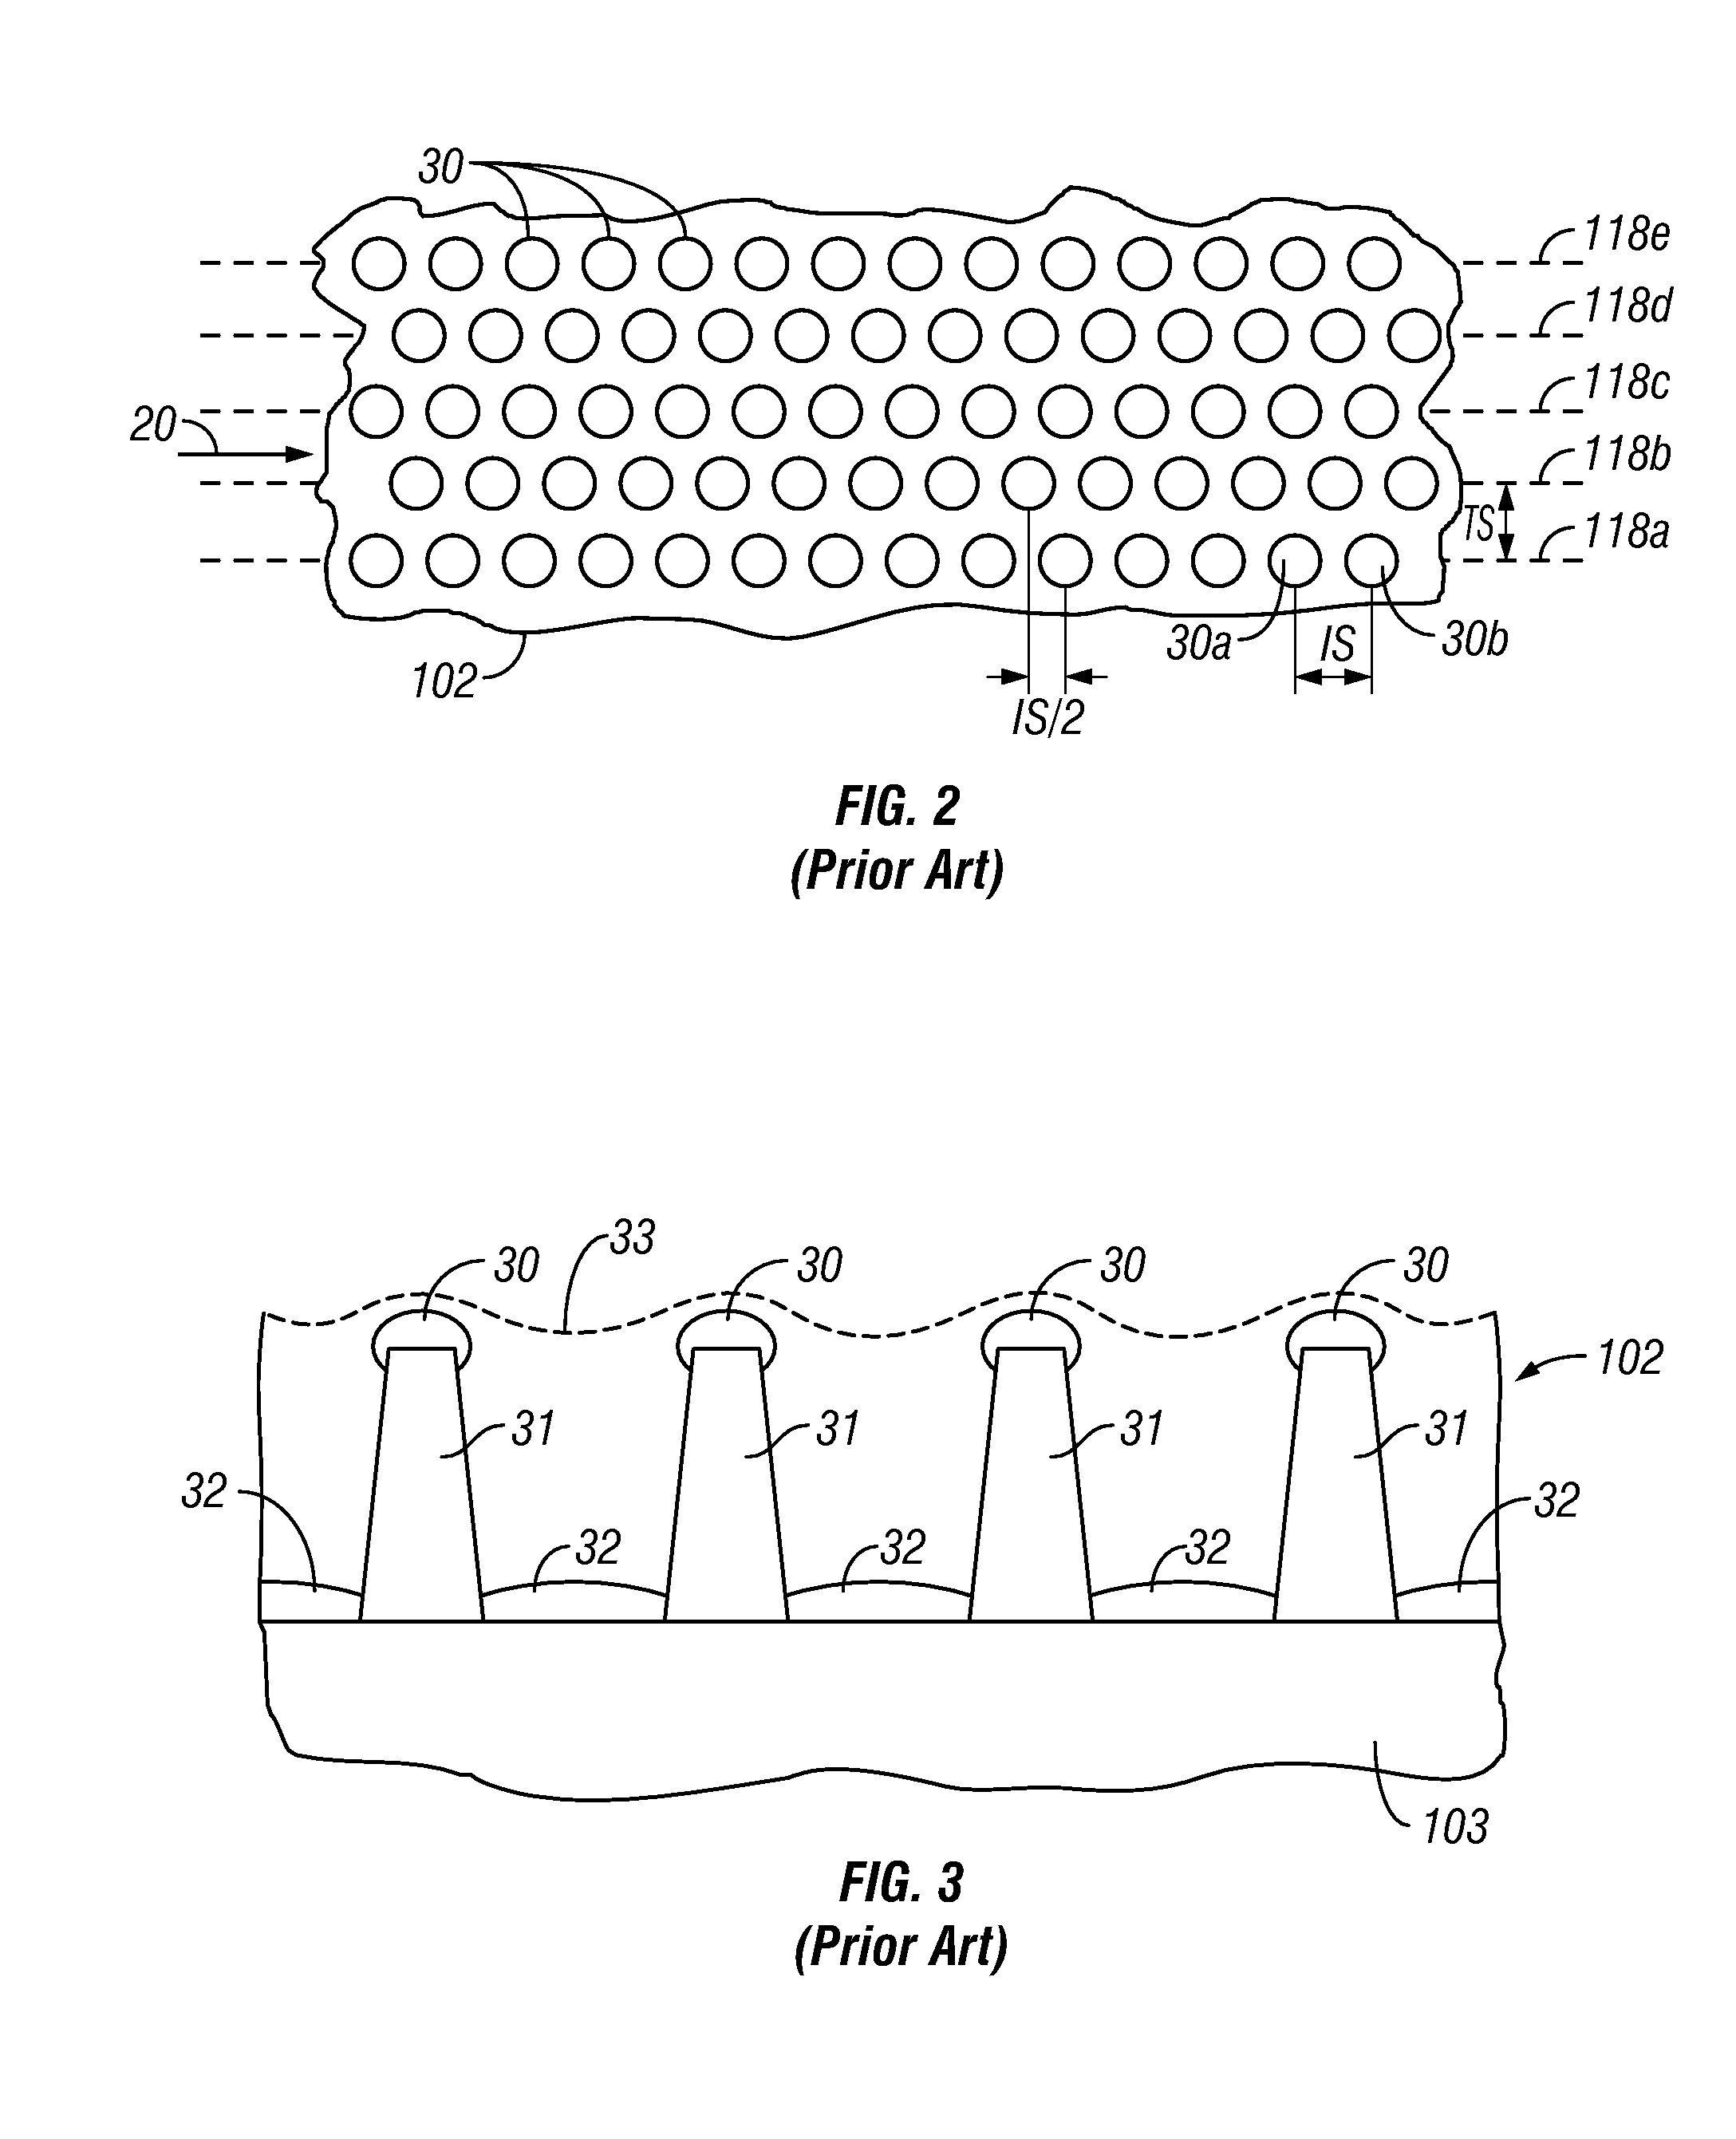 Patterned-media magnetic recording disk with optical contrast enhancement and disk drive using optical contrast for write synchronization